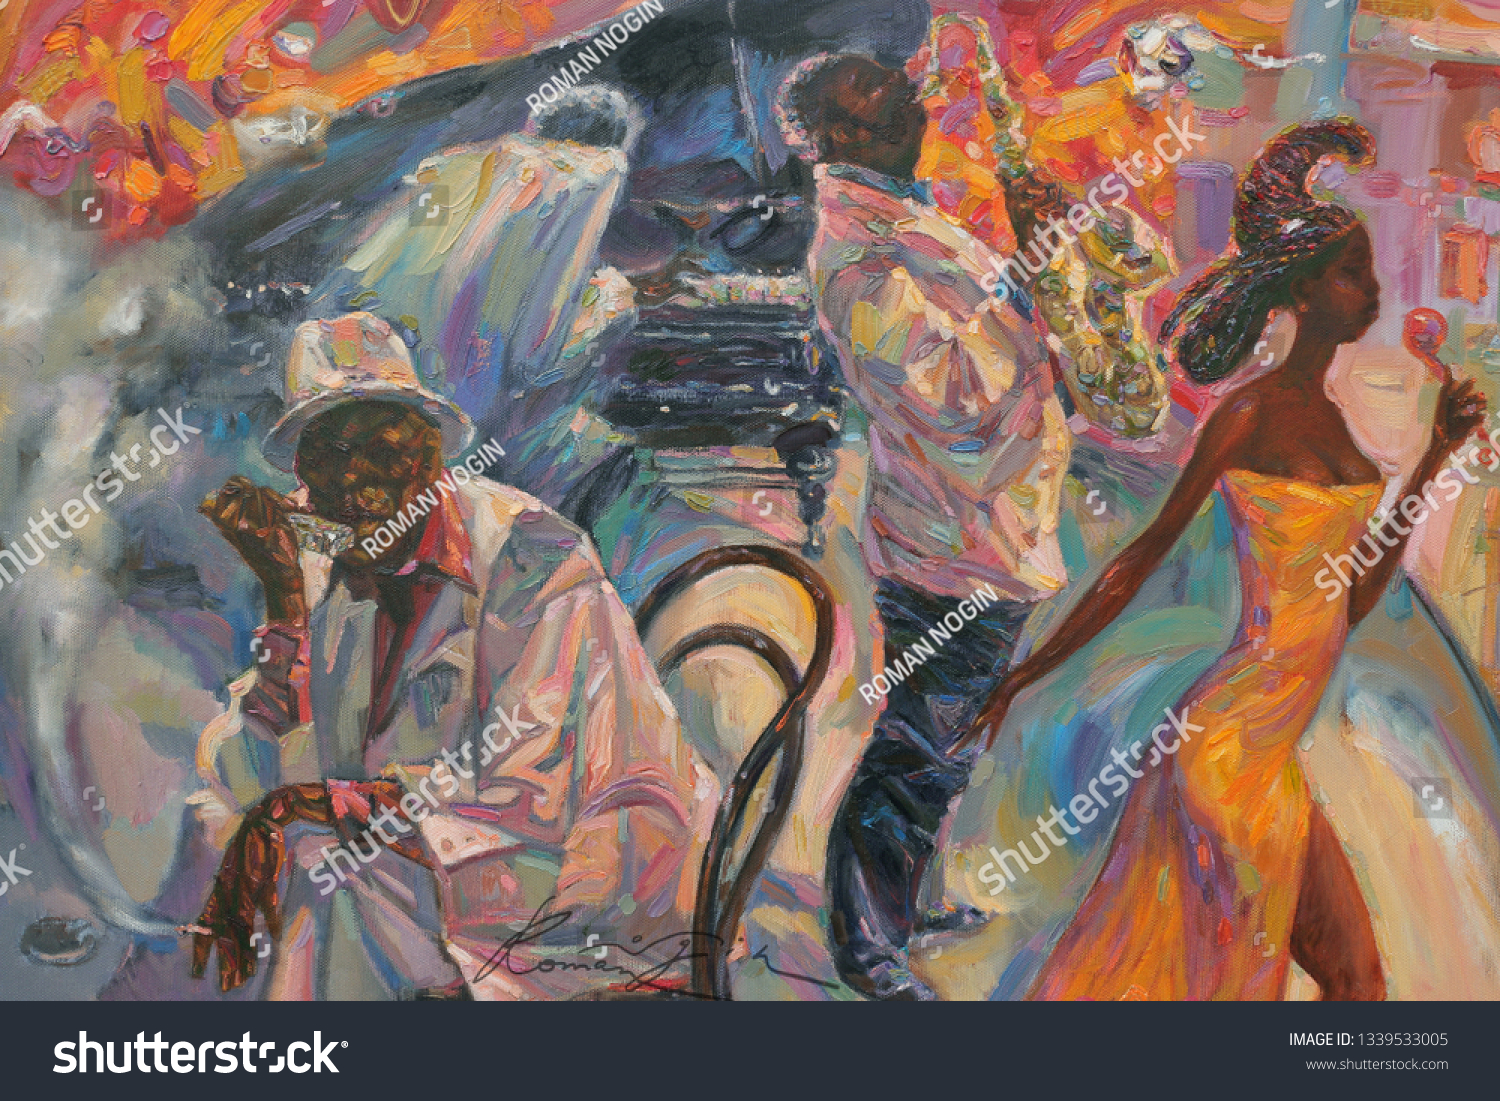 jazz band, oil painting, artist Roman Nogin, series "Sounds of Jazz."  #1339533005